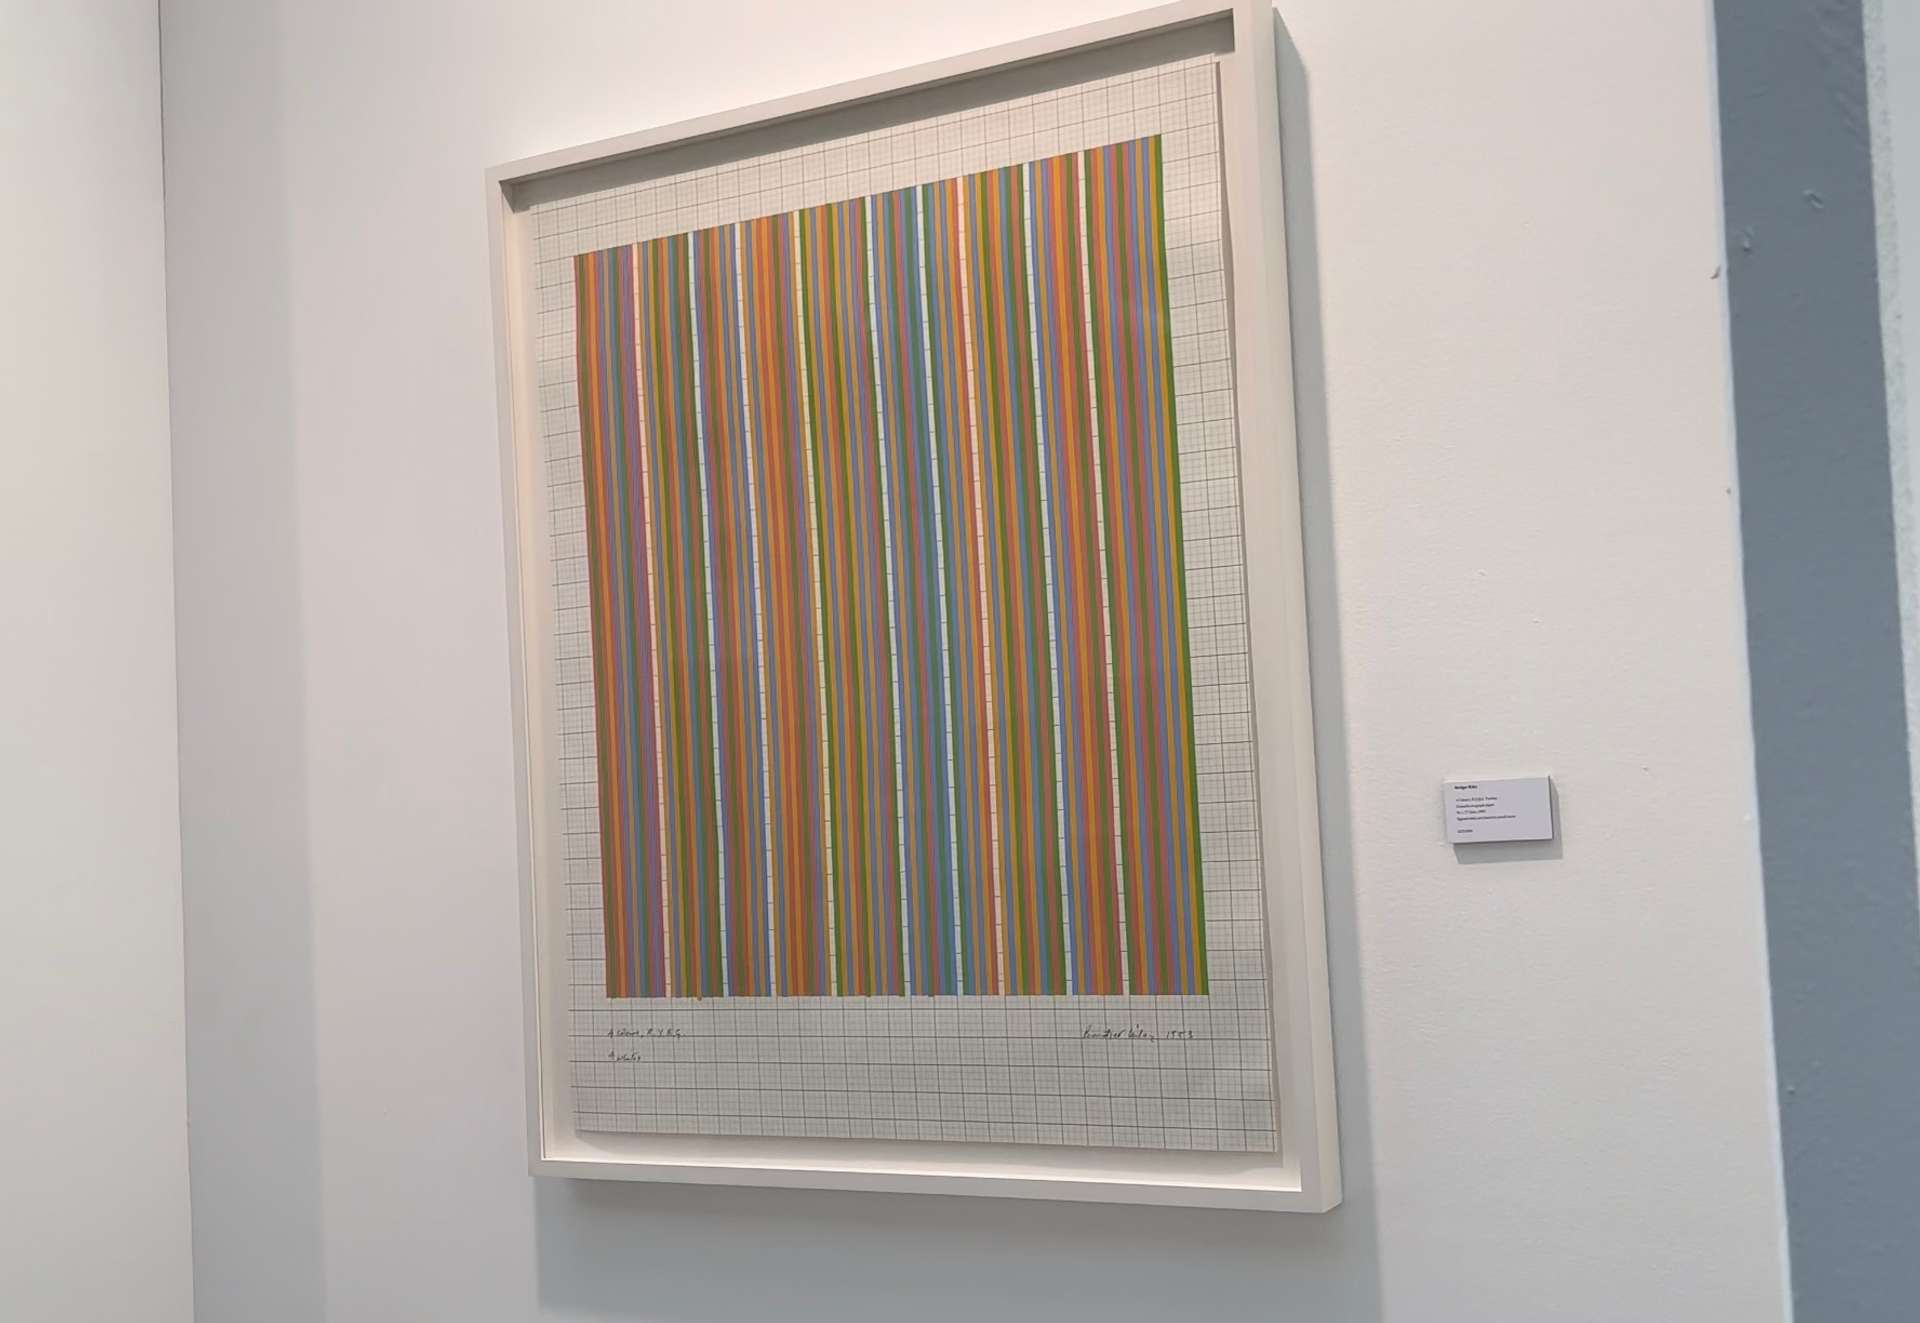 A photograph of an artwork by Bridget Riley depicting colourful straight vertical lines against a graph paper background.